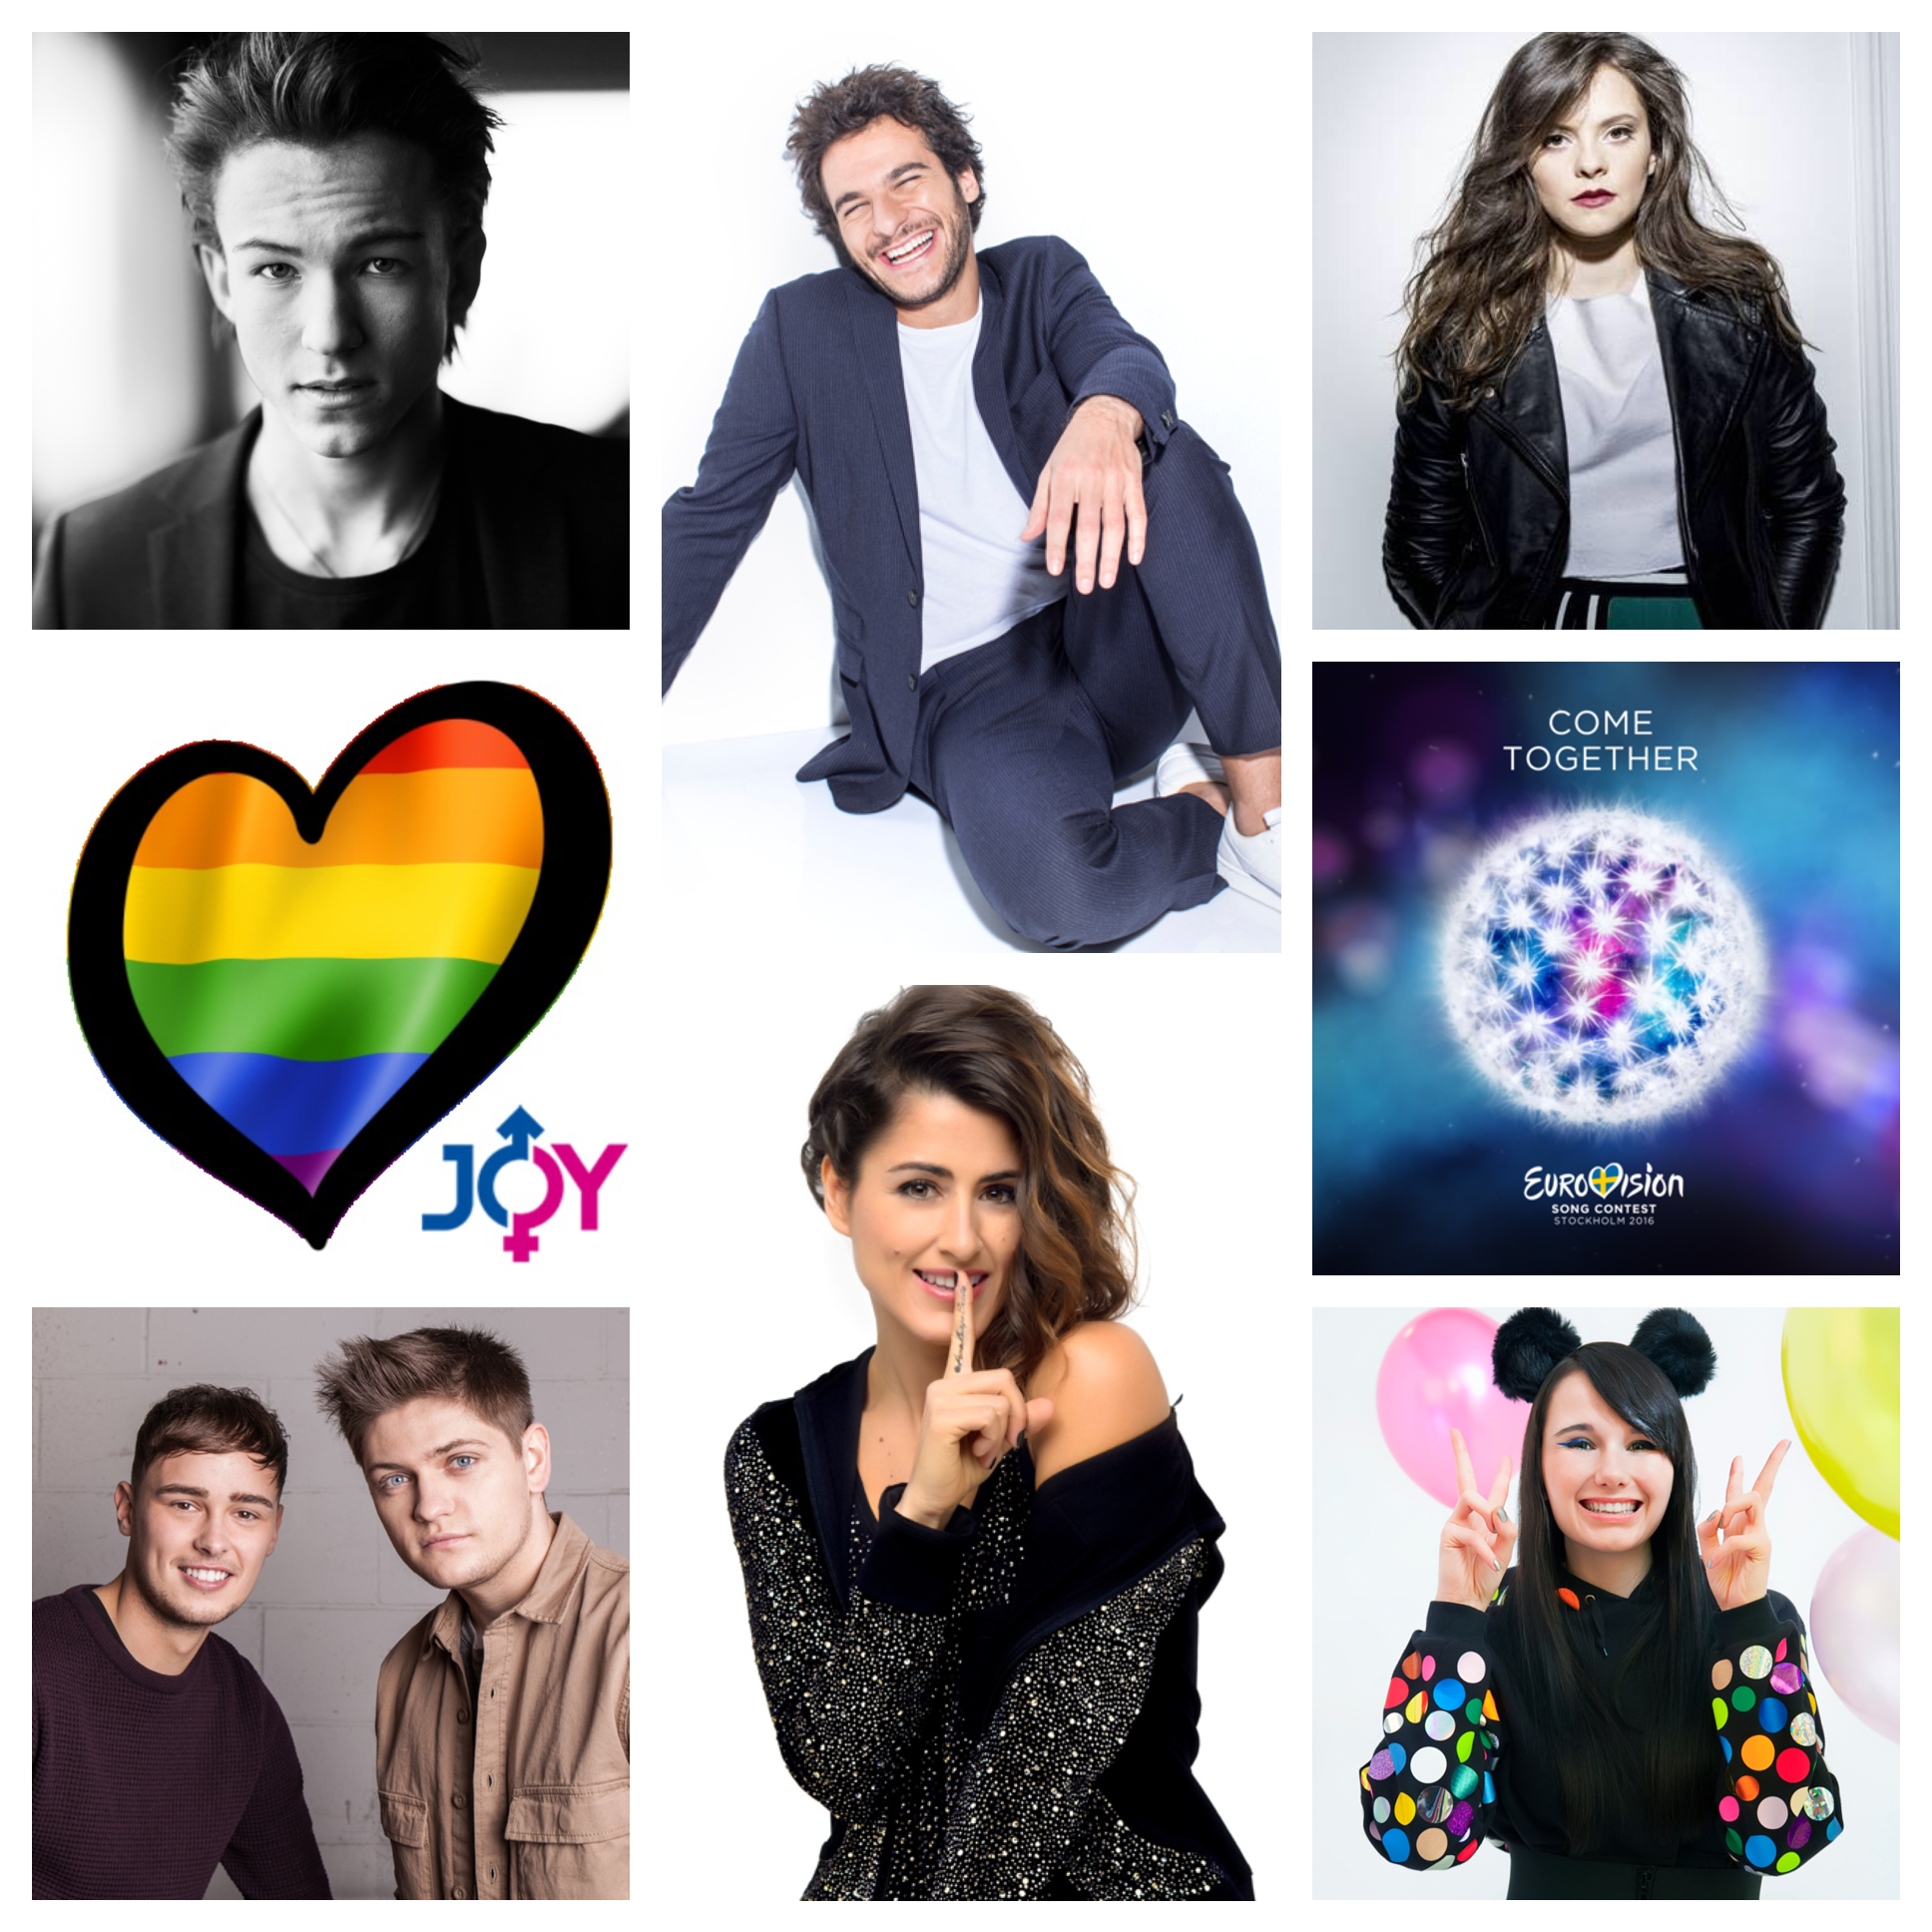 It’s the Big One: Eurovision 2016 Grand Final Preview